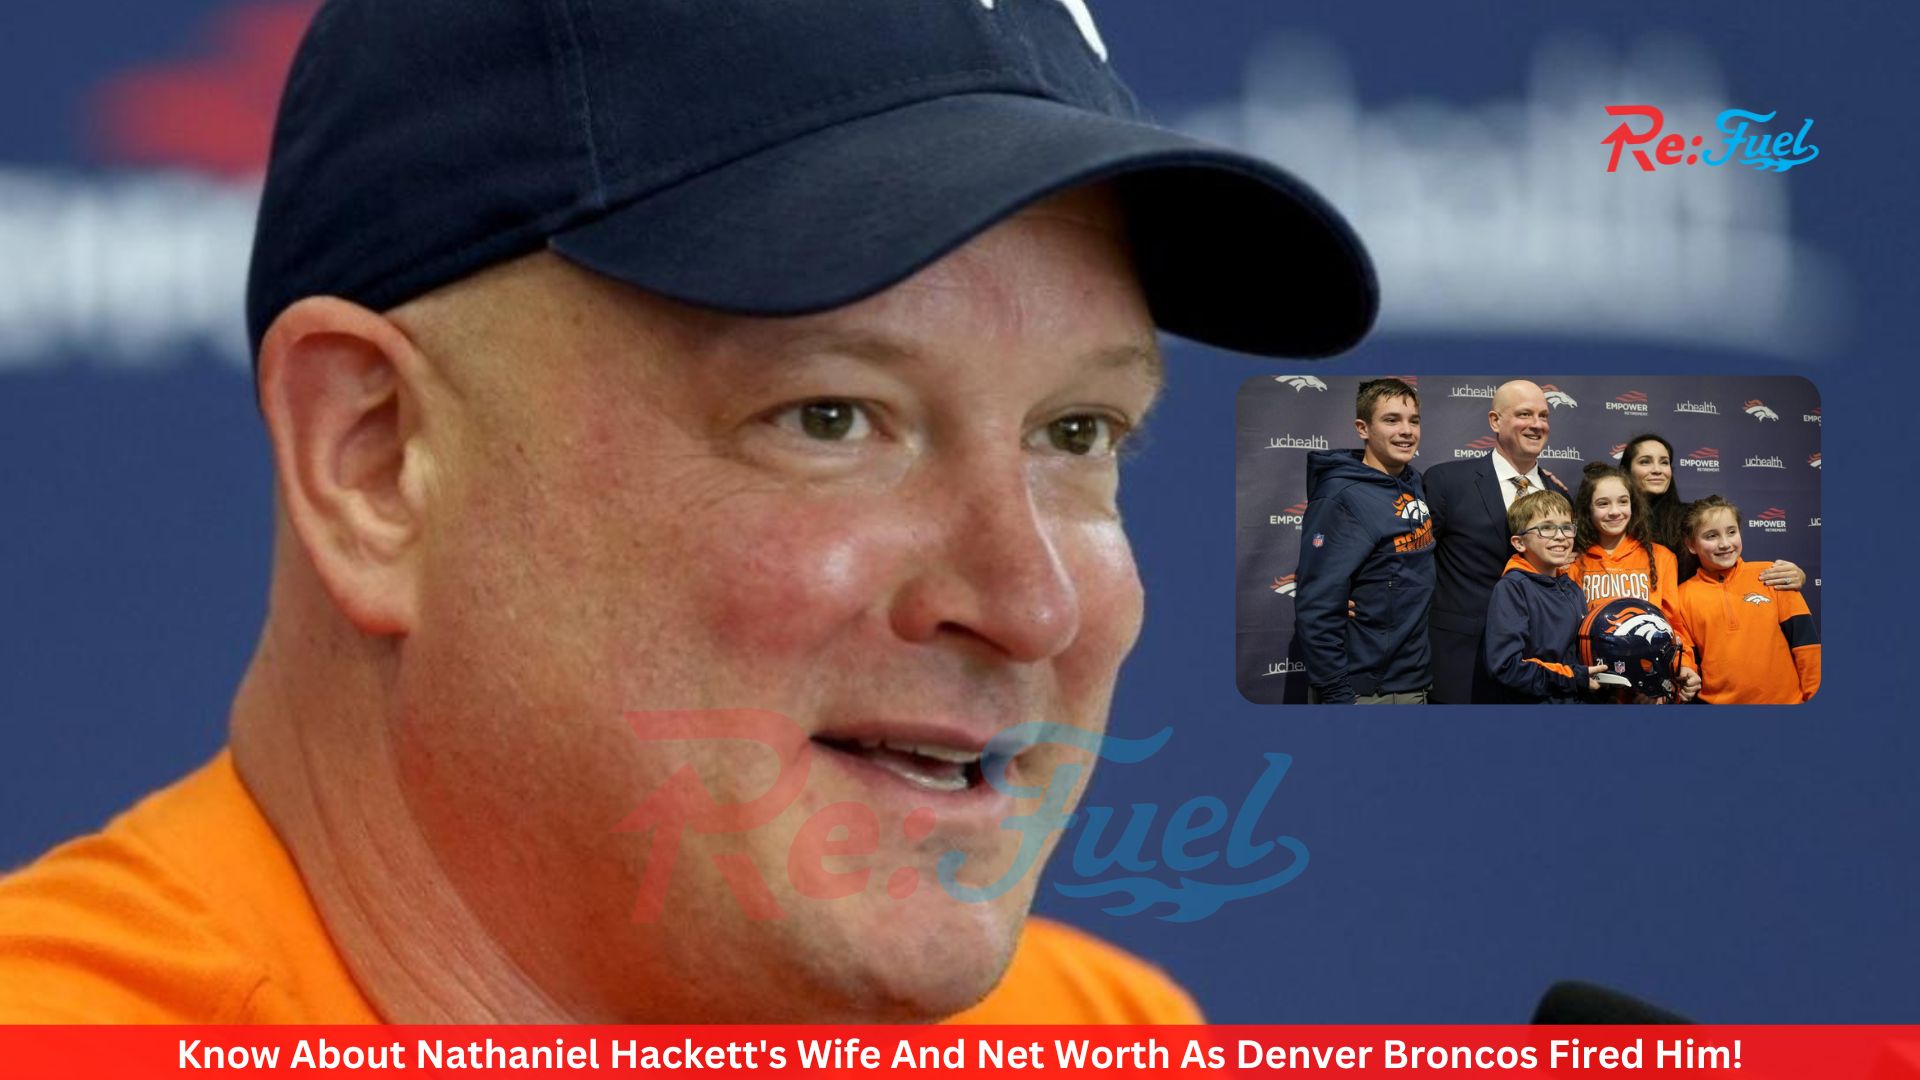 Know About Nathaniel Hackett's Wife And Net Worth As Denver Broncos Fired Him!